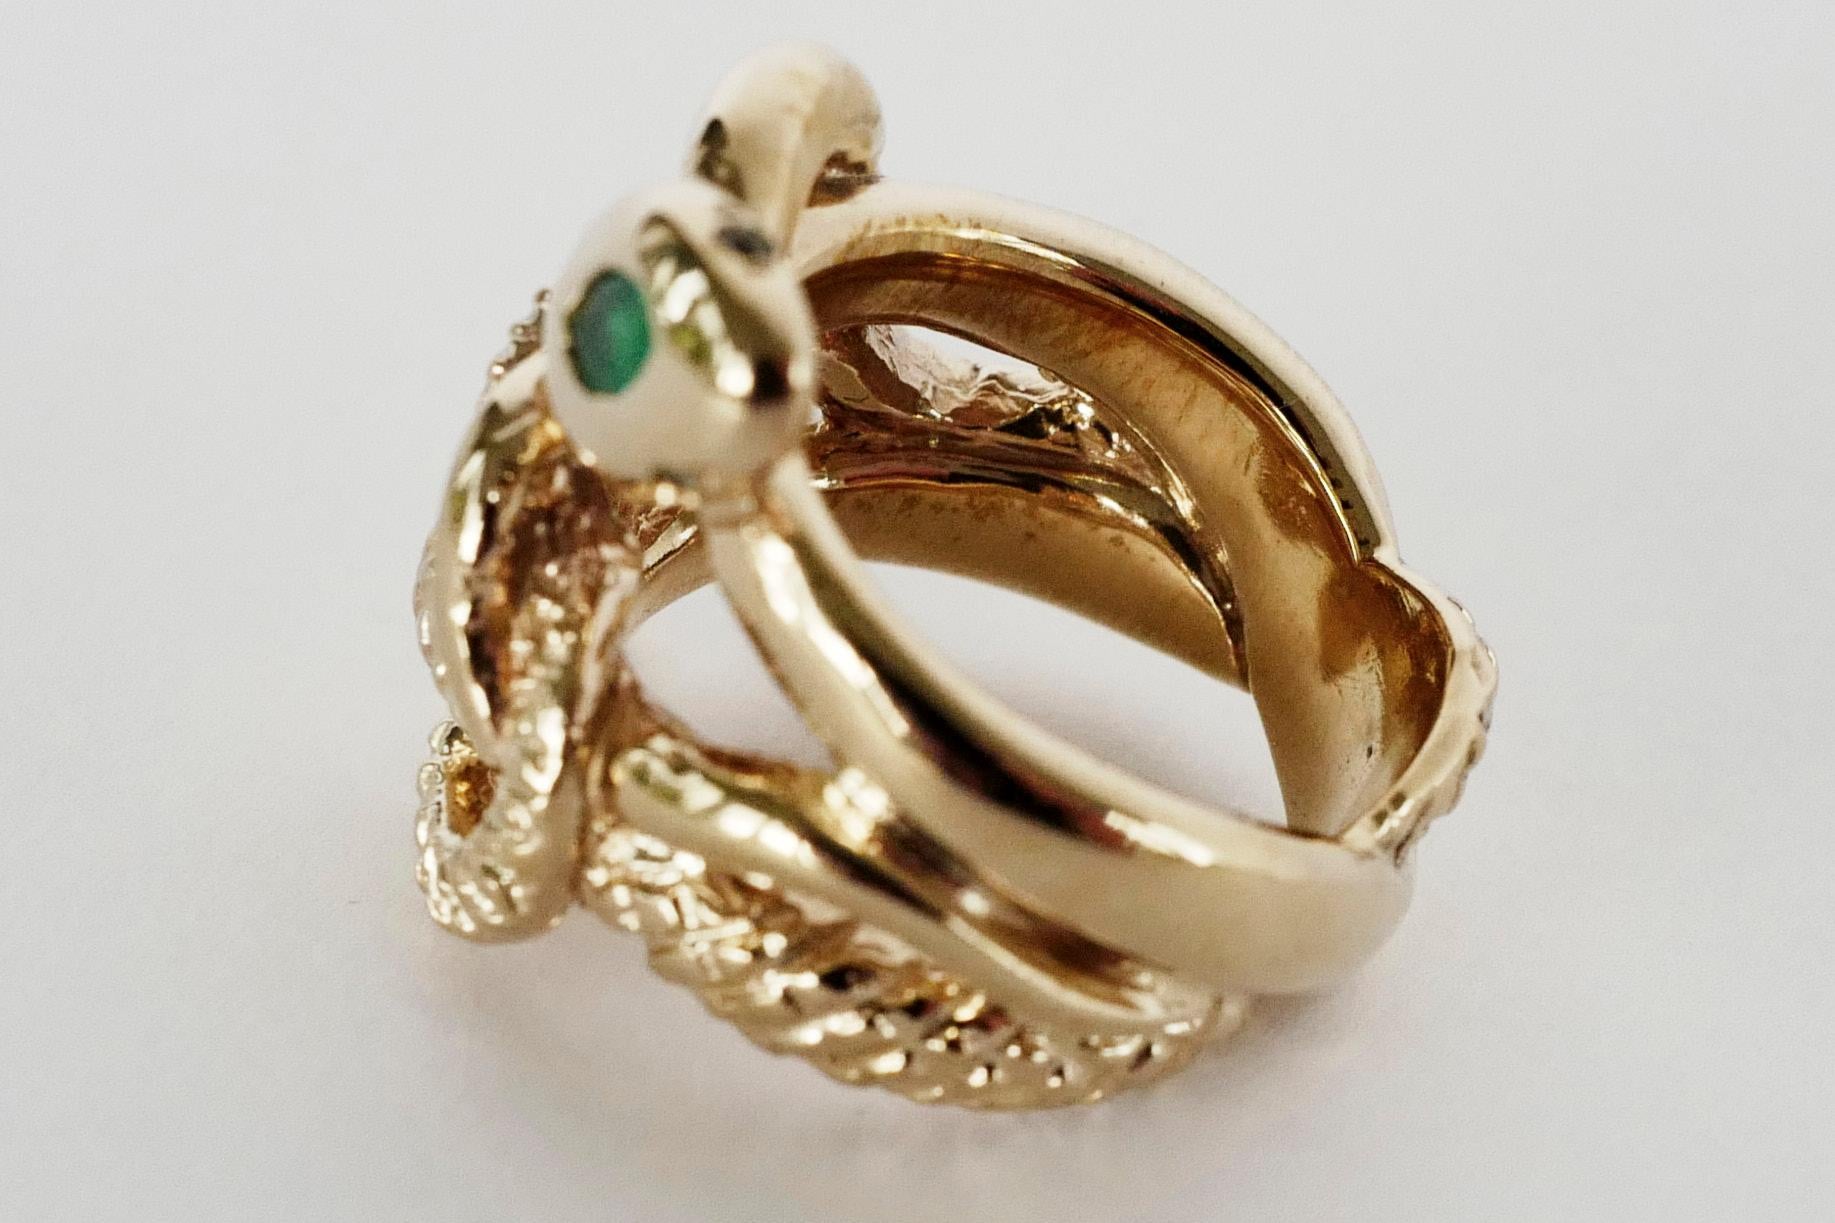 Emerald White Diamond Snake Ring Ruby Eyes Bronze Victorian Style J Dauphin For Sale 1